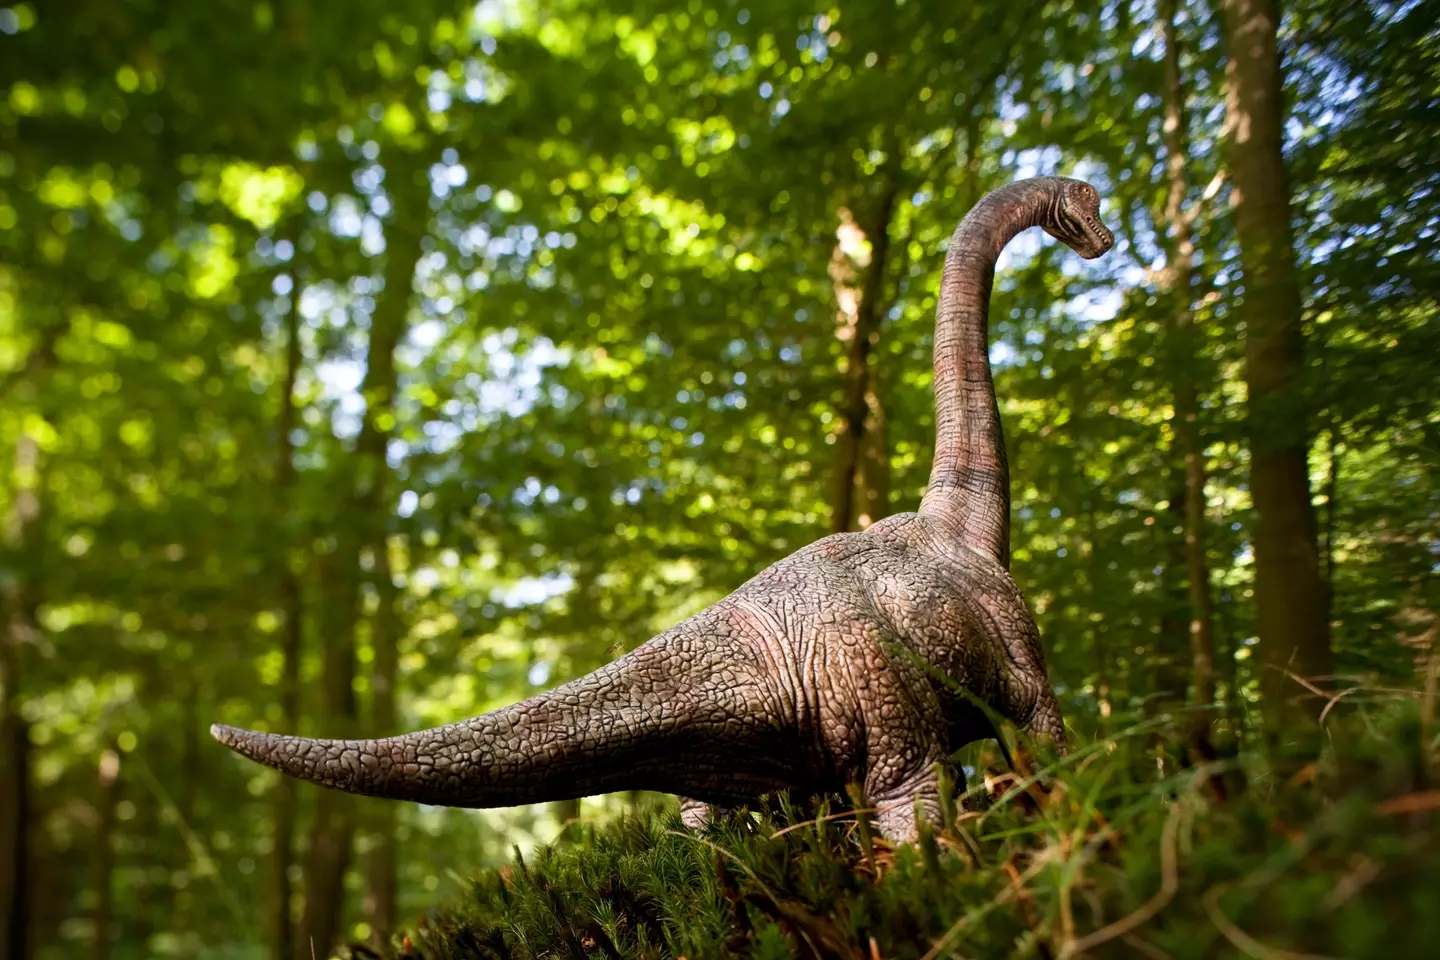 Palaeontologists think they’ve stumbled upon the remains of the biggest sauropod dinosaur ever found in Europe.